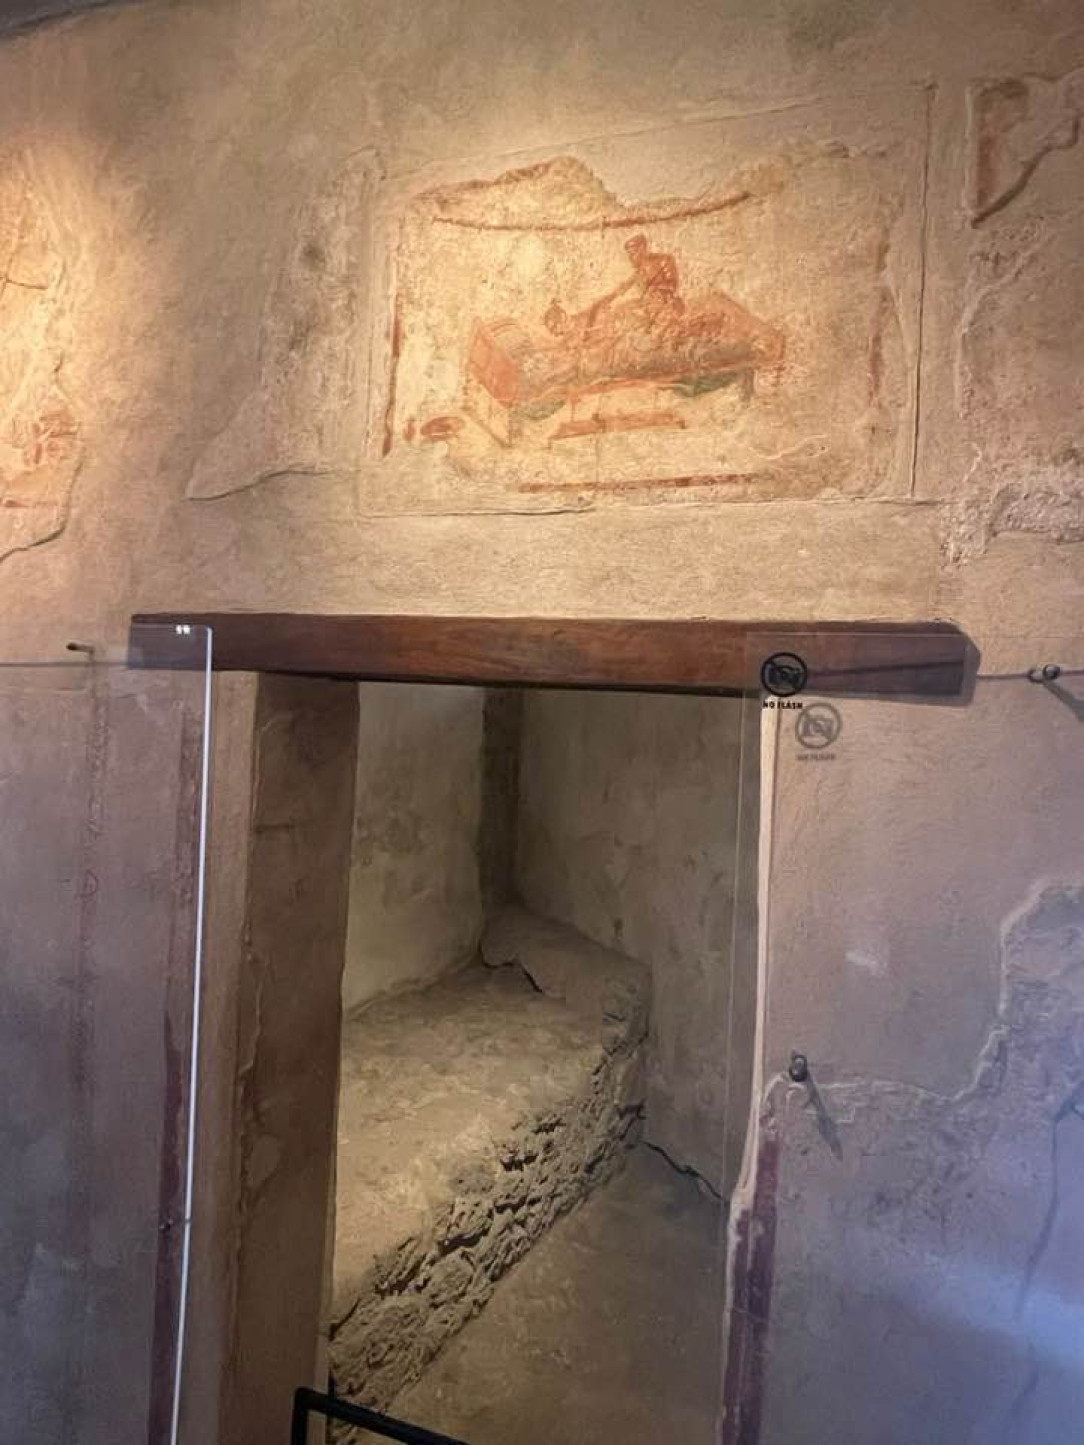 A room in the Lupanar Grande (main brothel) with the specialty of the &quot;performer&quot; painted above her workplace. Pompeii, Italy